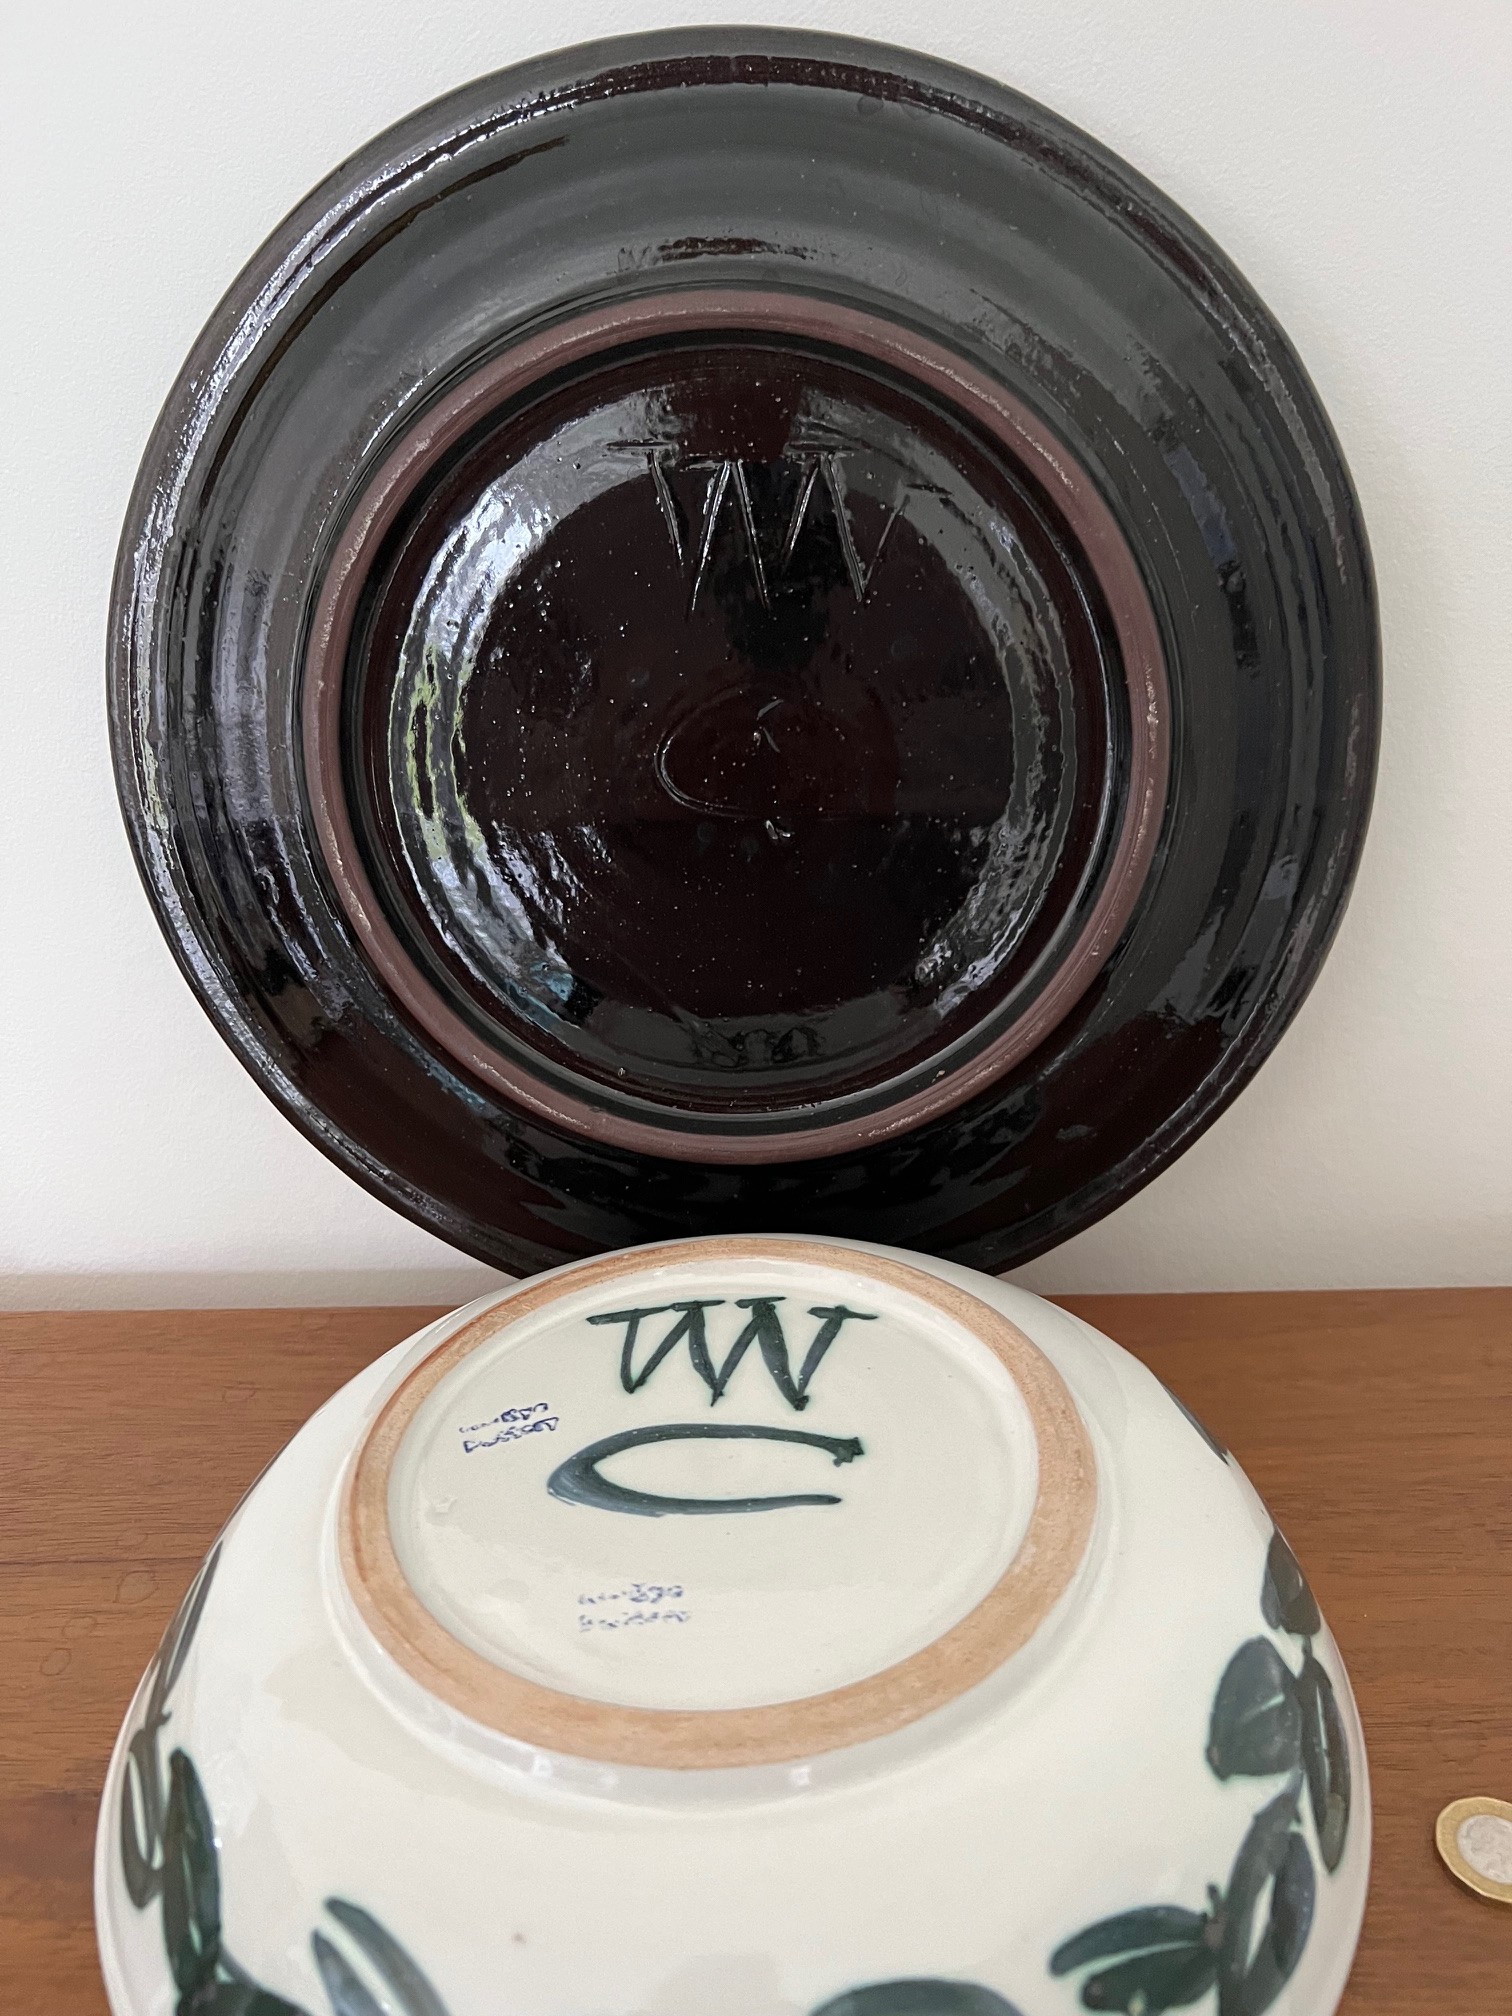 WALLY COLE STUDIO POTTERY GLAZED CERAMIC PLAQUE AND BOWL - Image 3 of 3